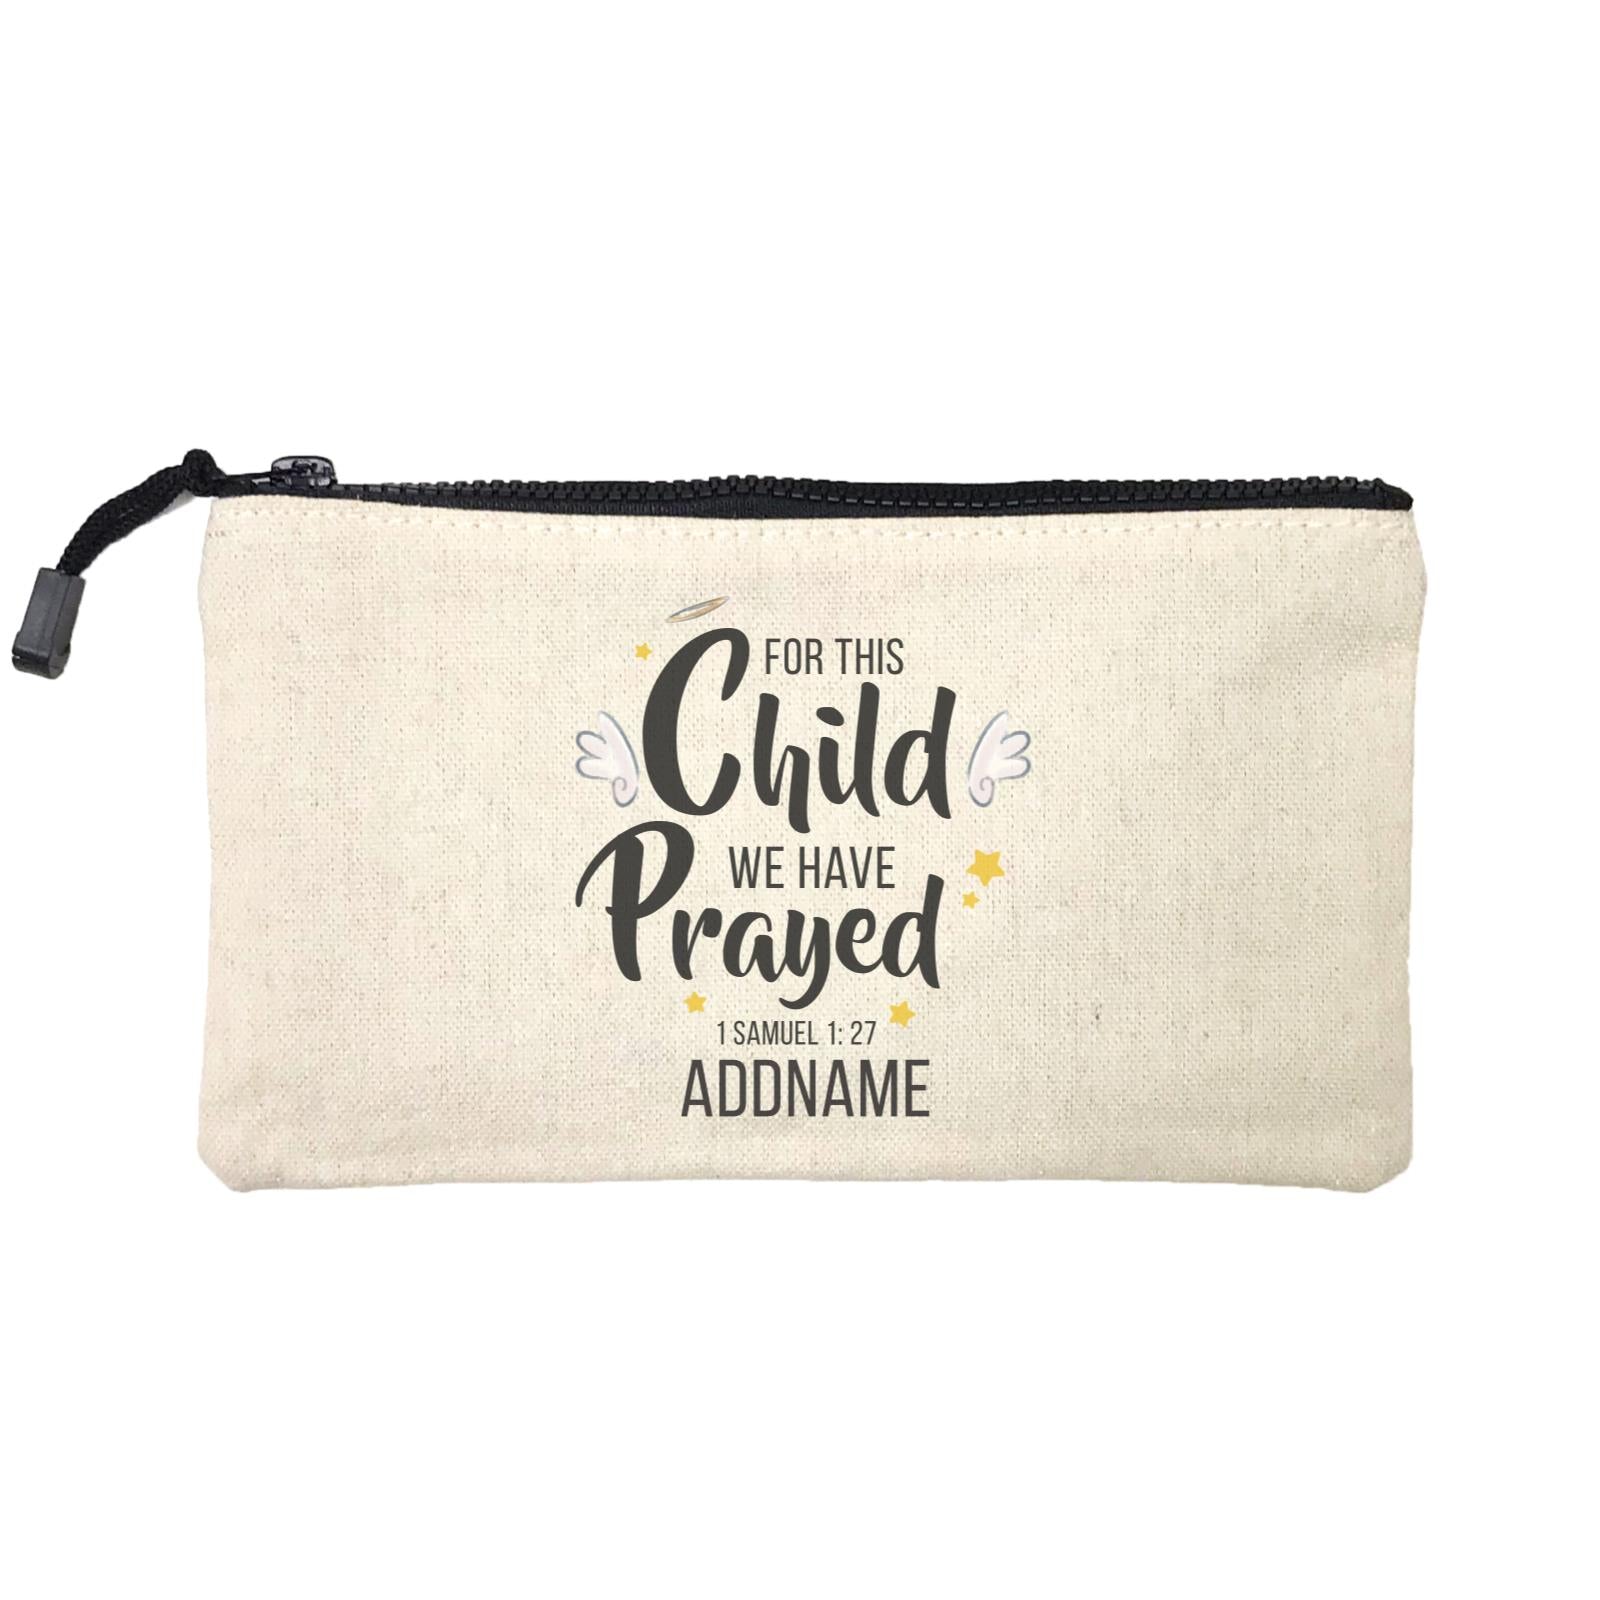 Gods Gift For This Child We Have Prayed 1 Samuel 1.27 Addname Mini Accessories Stationery Pouch